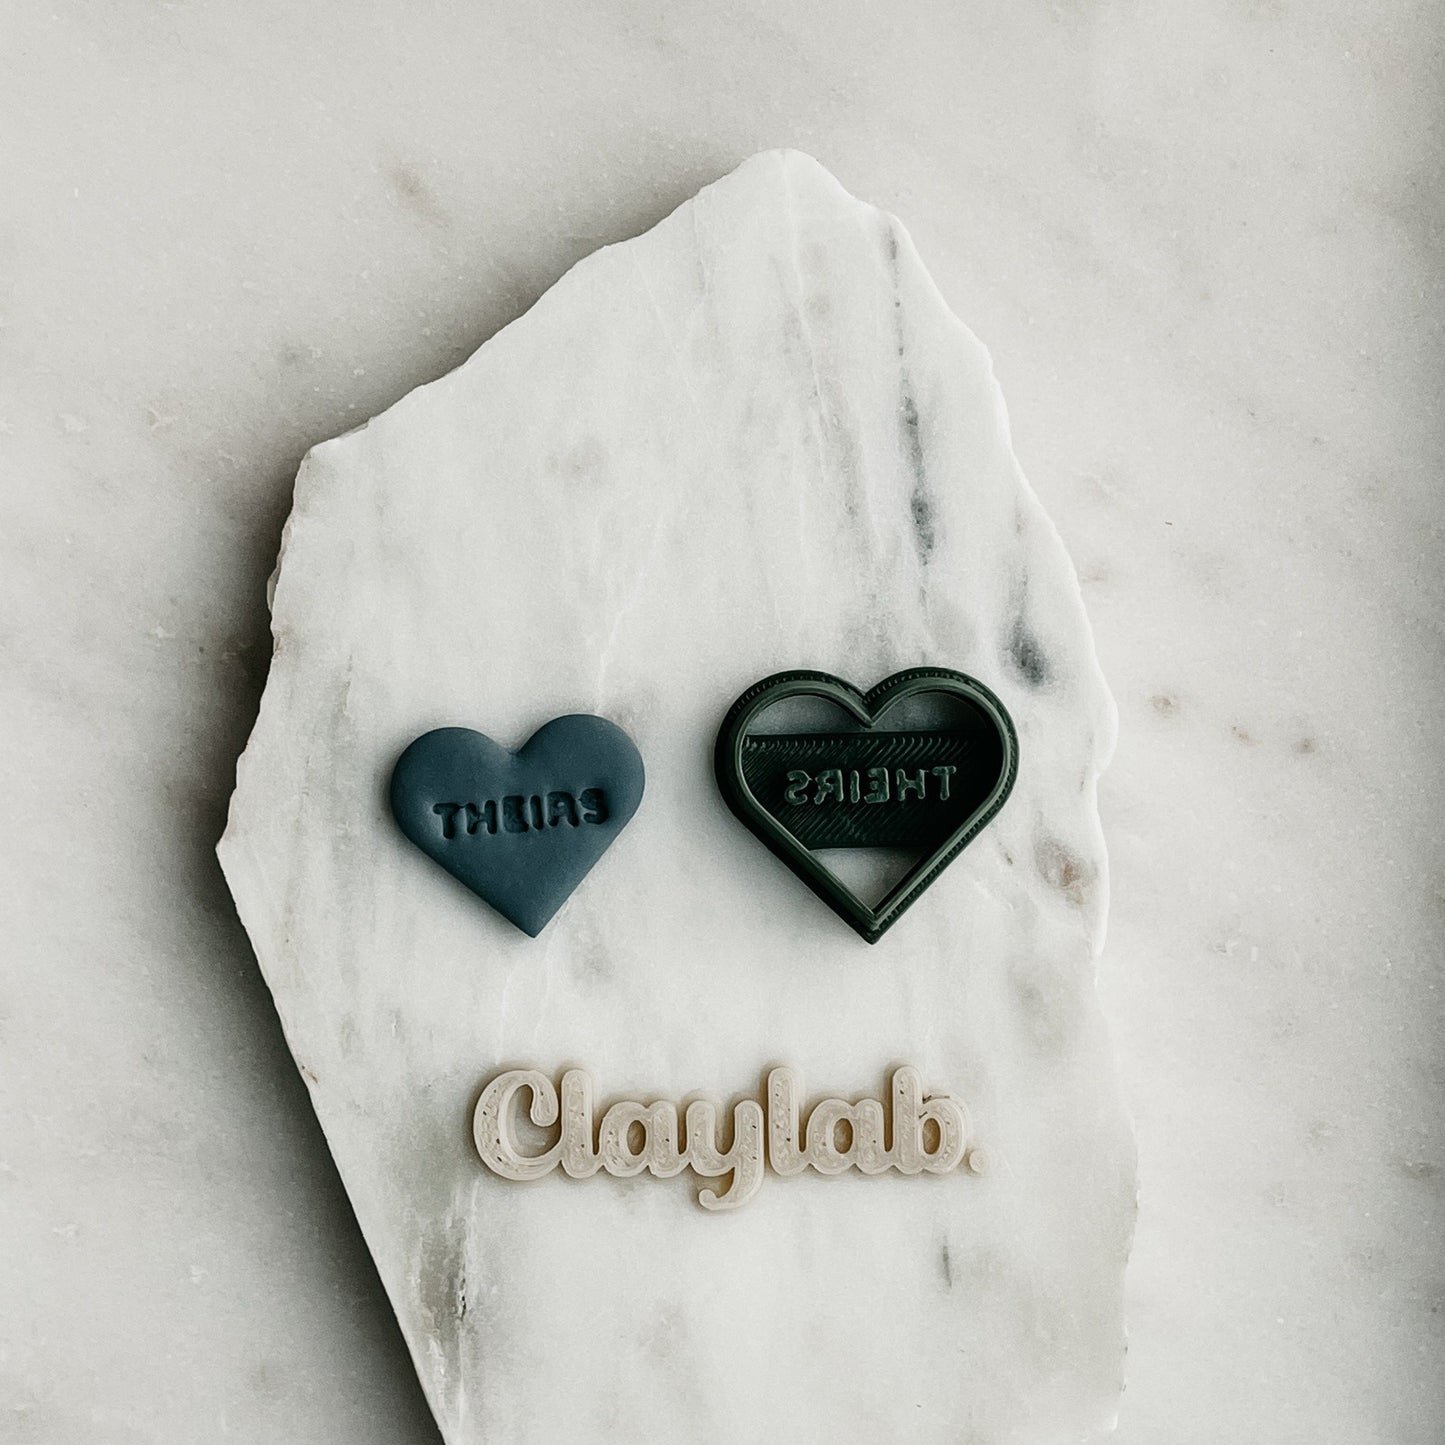 THEIRS Candy Heart Clay Cutter Claylab